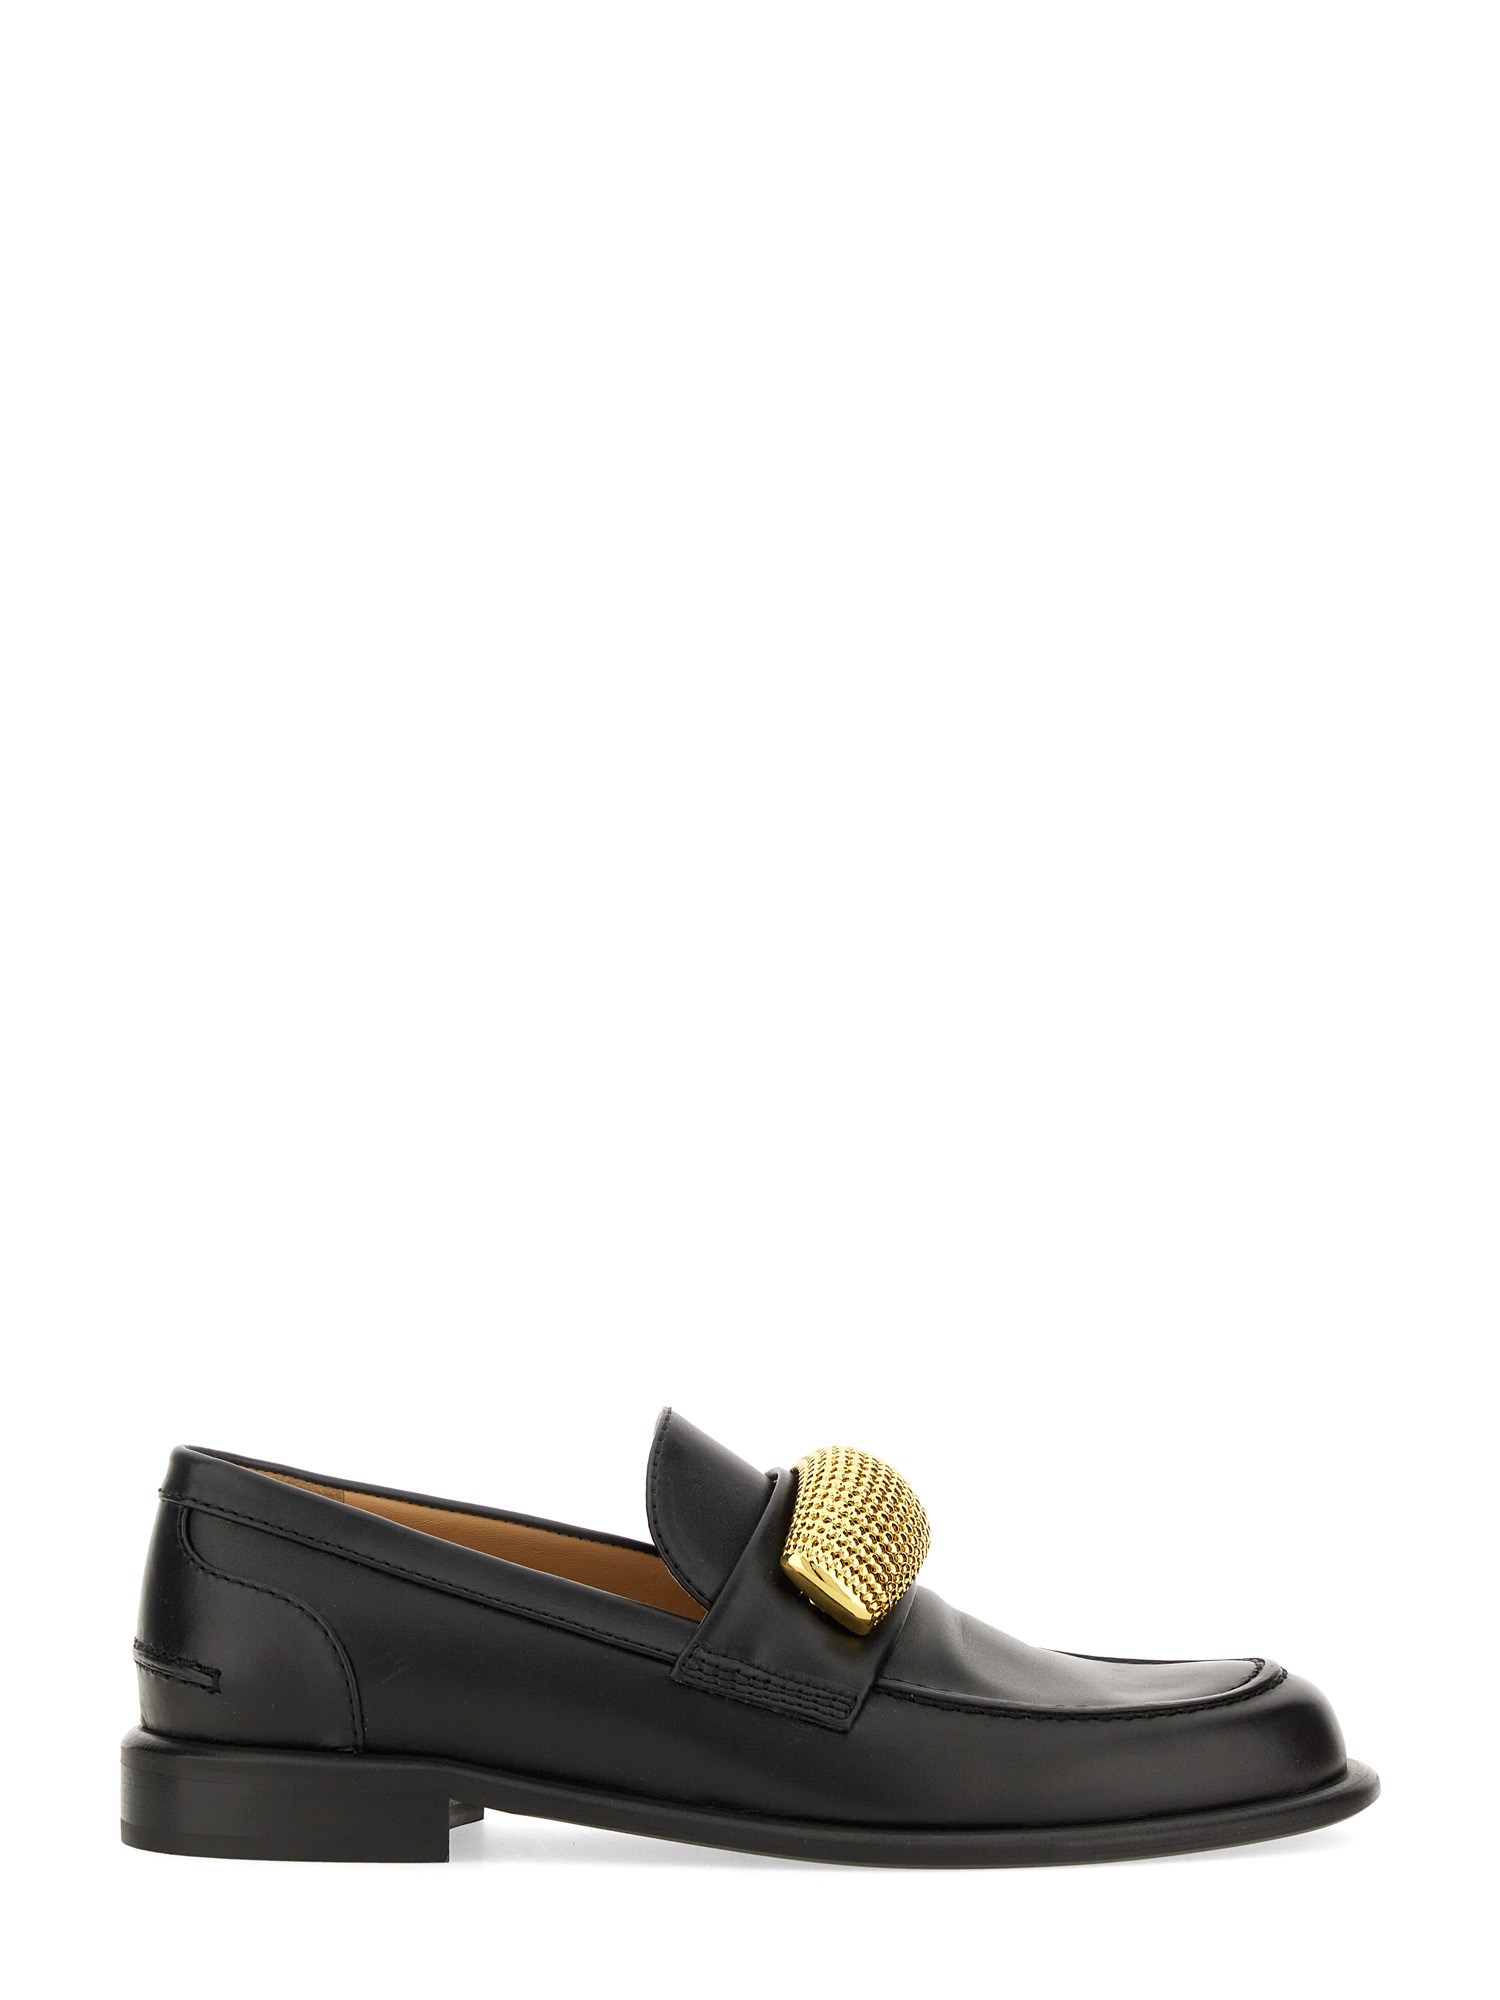 jw anderson moccasin 